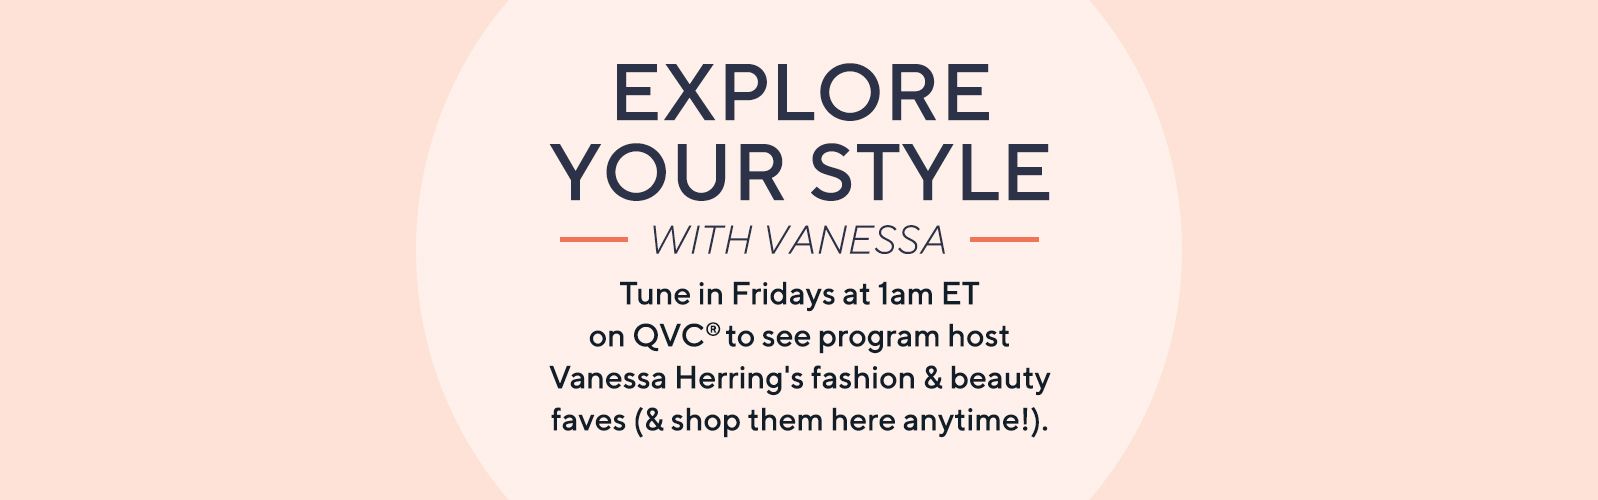 Explore Your Style with Vanessa:  Tune in Fridays at 1am ET on QVC® to see program host Vanessa Herring's fashion & beauty faves (& shop them here anytime!).